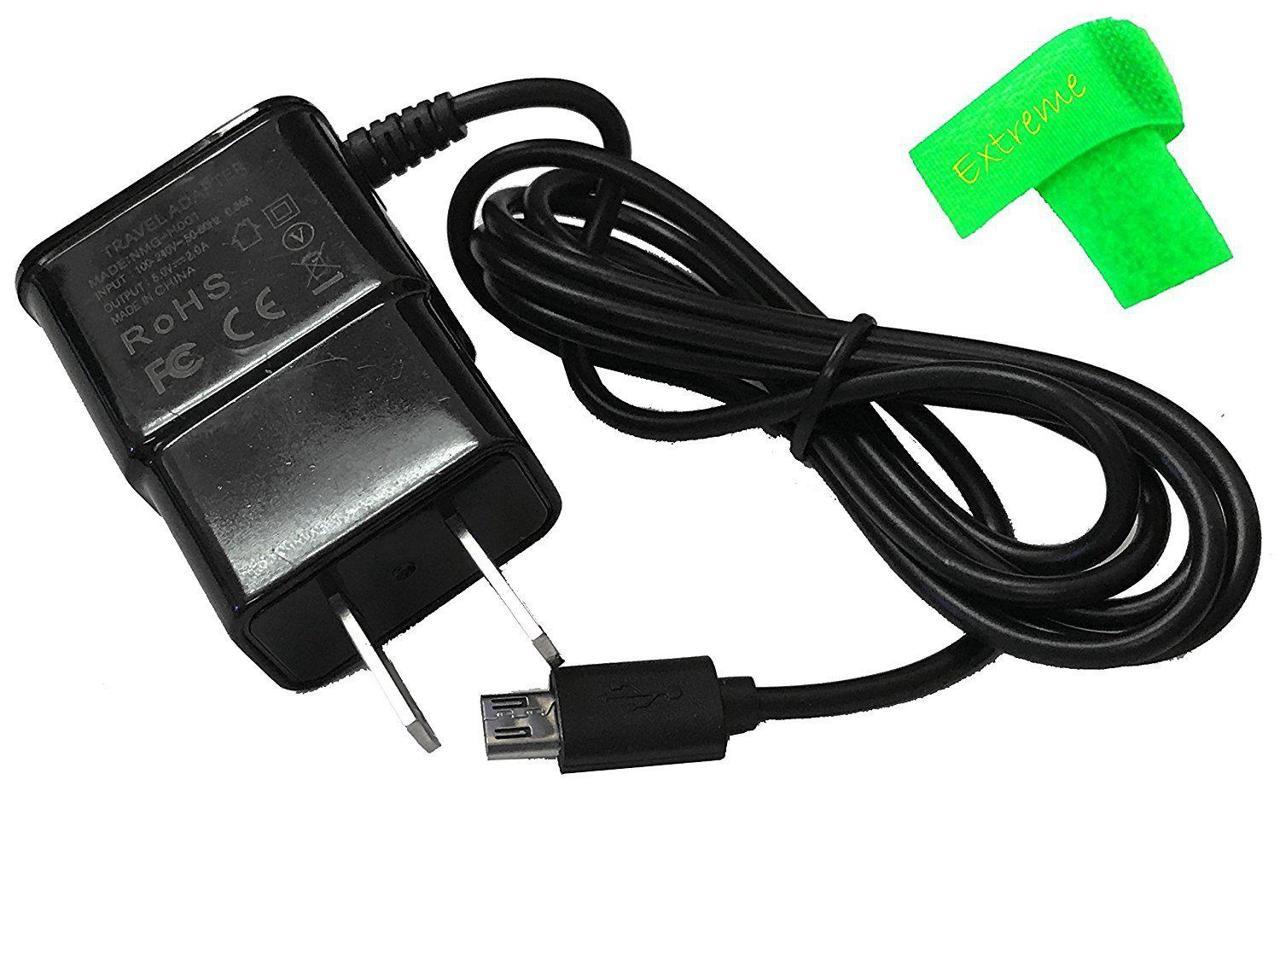 Z233VL 2 AMP Home Travel Wall Charger Adaptor Micro USB for ZTE Cymbal-G LTE Z232TL 2 Amp Wall Charger